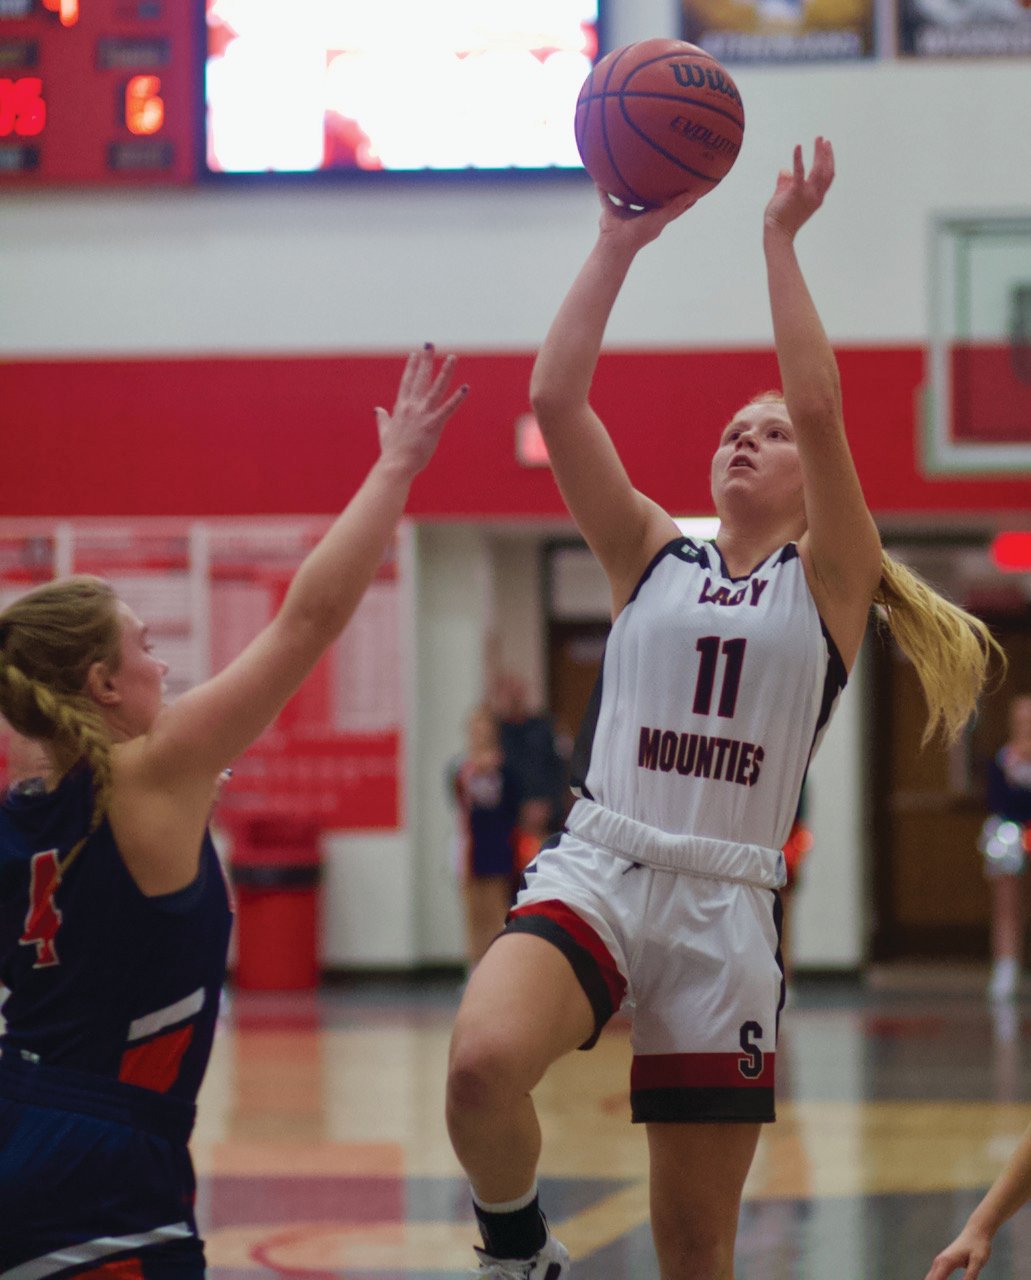 Hanna Nichols recorded seven points in the Mounties 62-60 win over North Putnam Wednesday night.